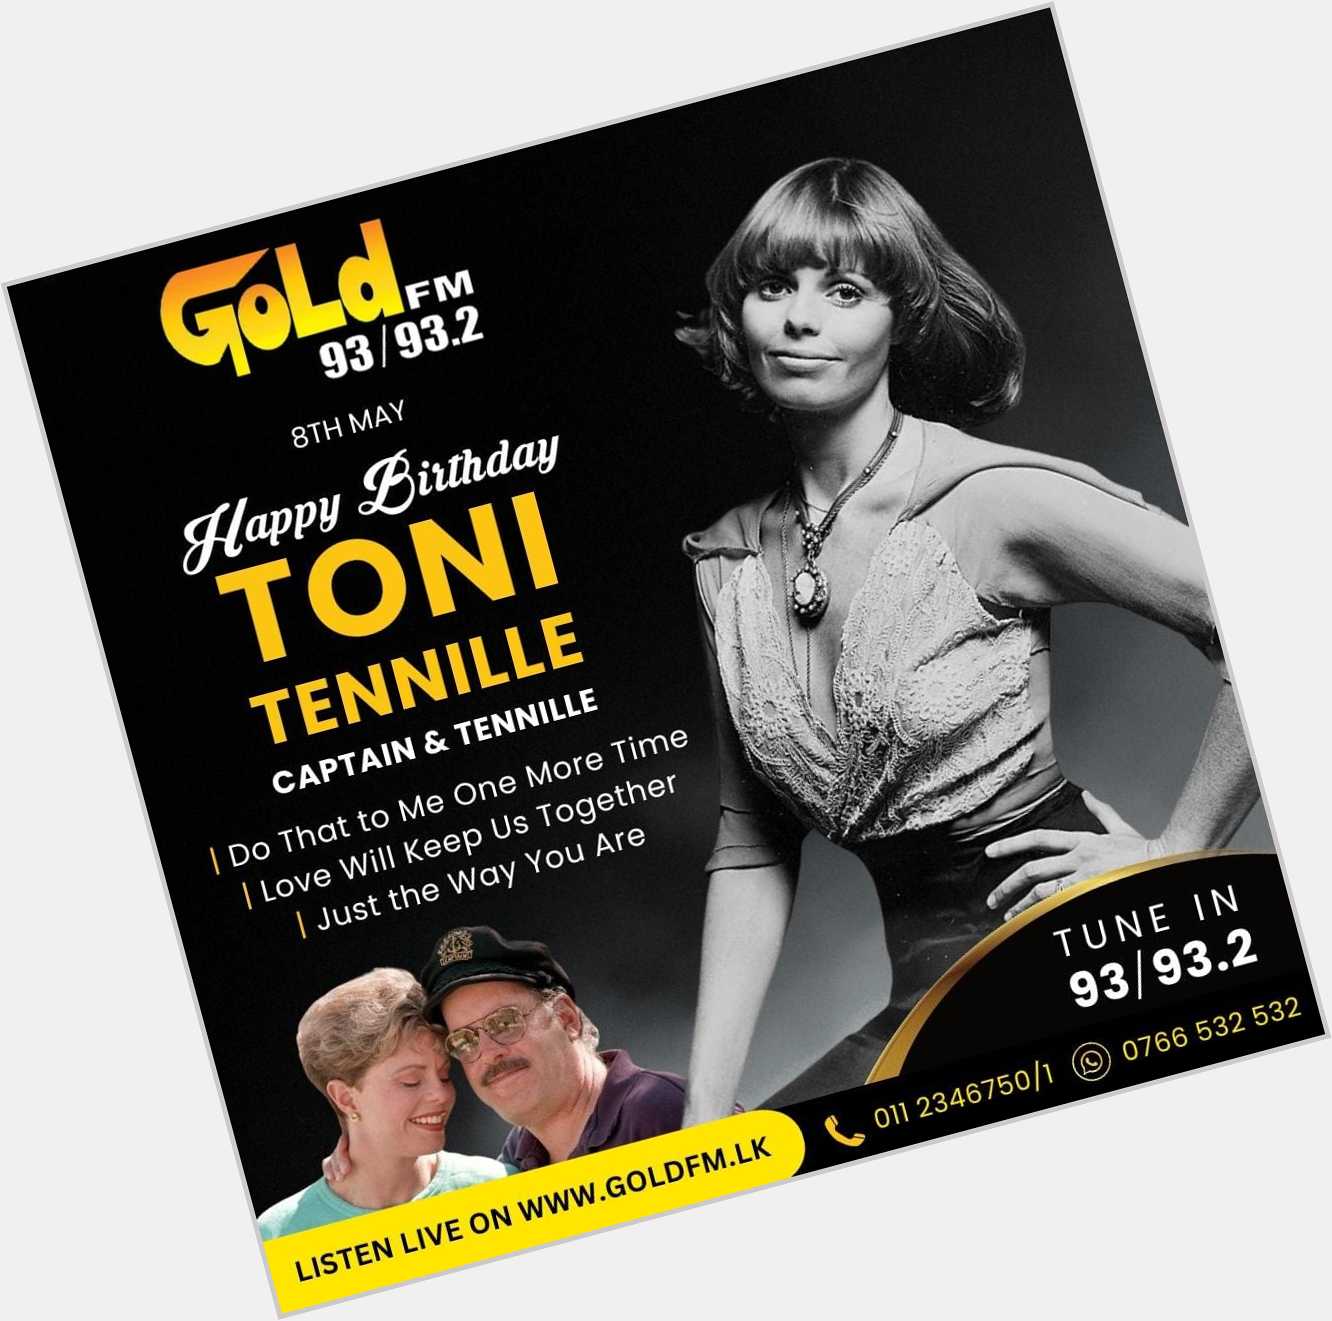 HAPPY BIRTHDAY TO TONI TENNILLE TUNE IN NOW 93 / 93.2 Island wide     